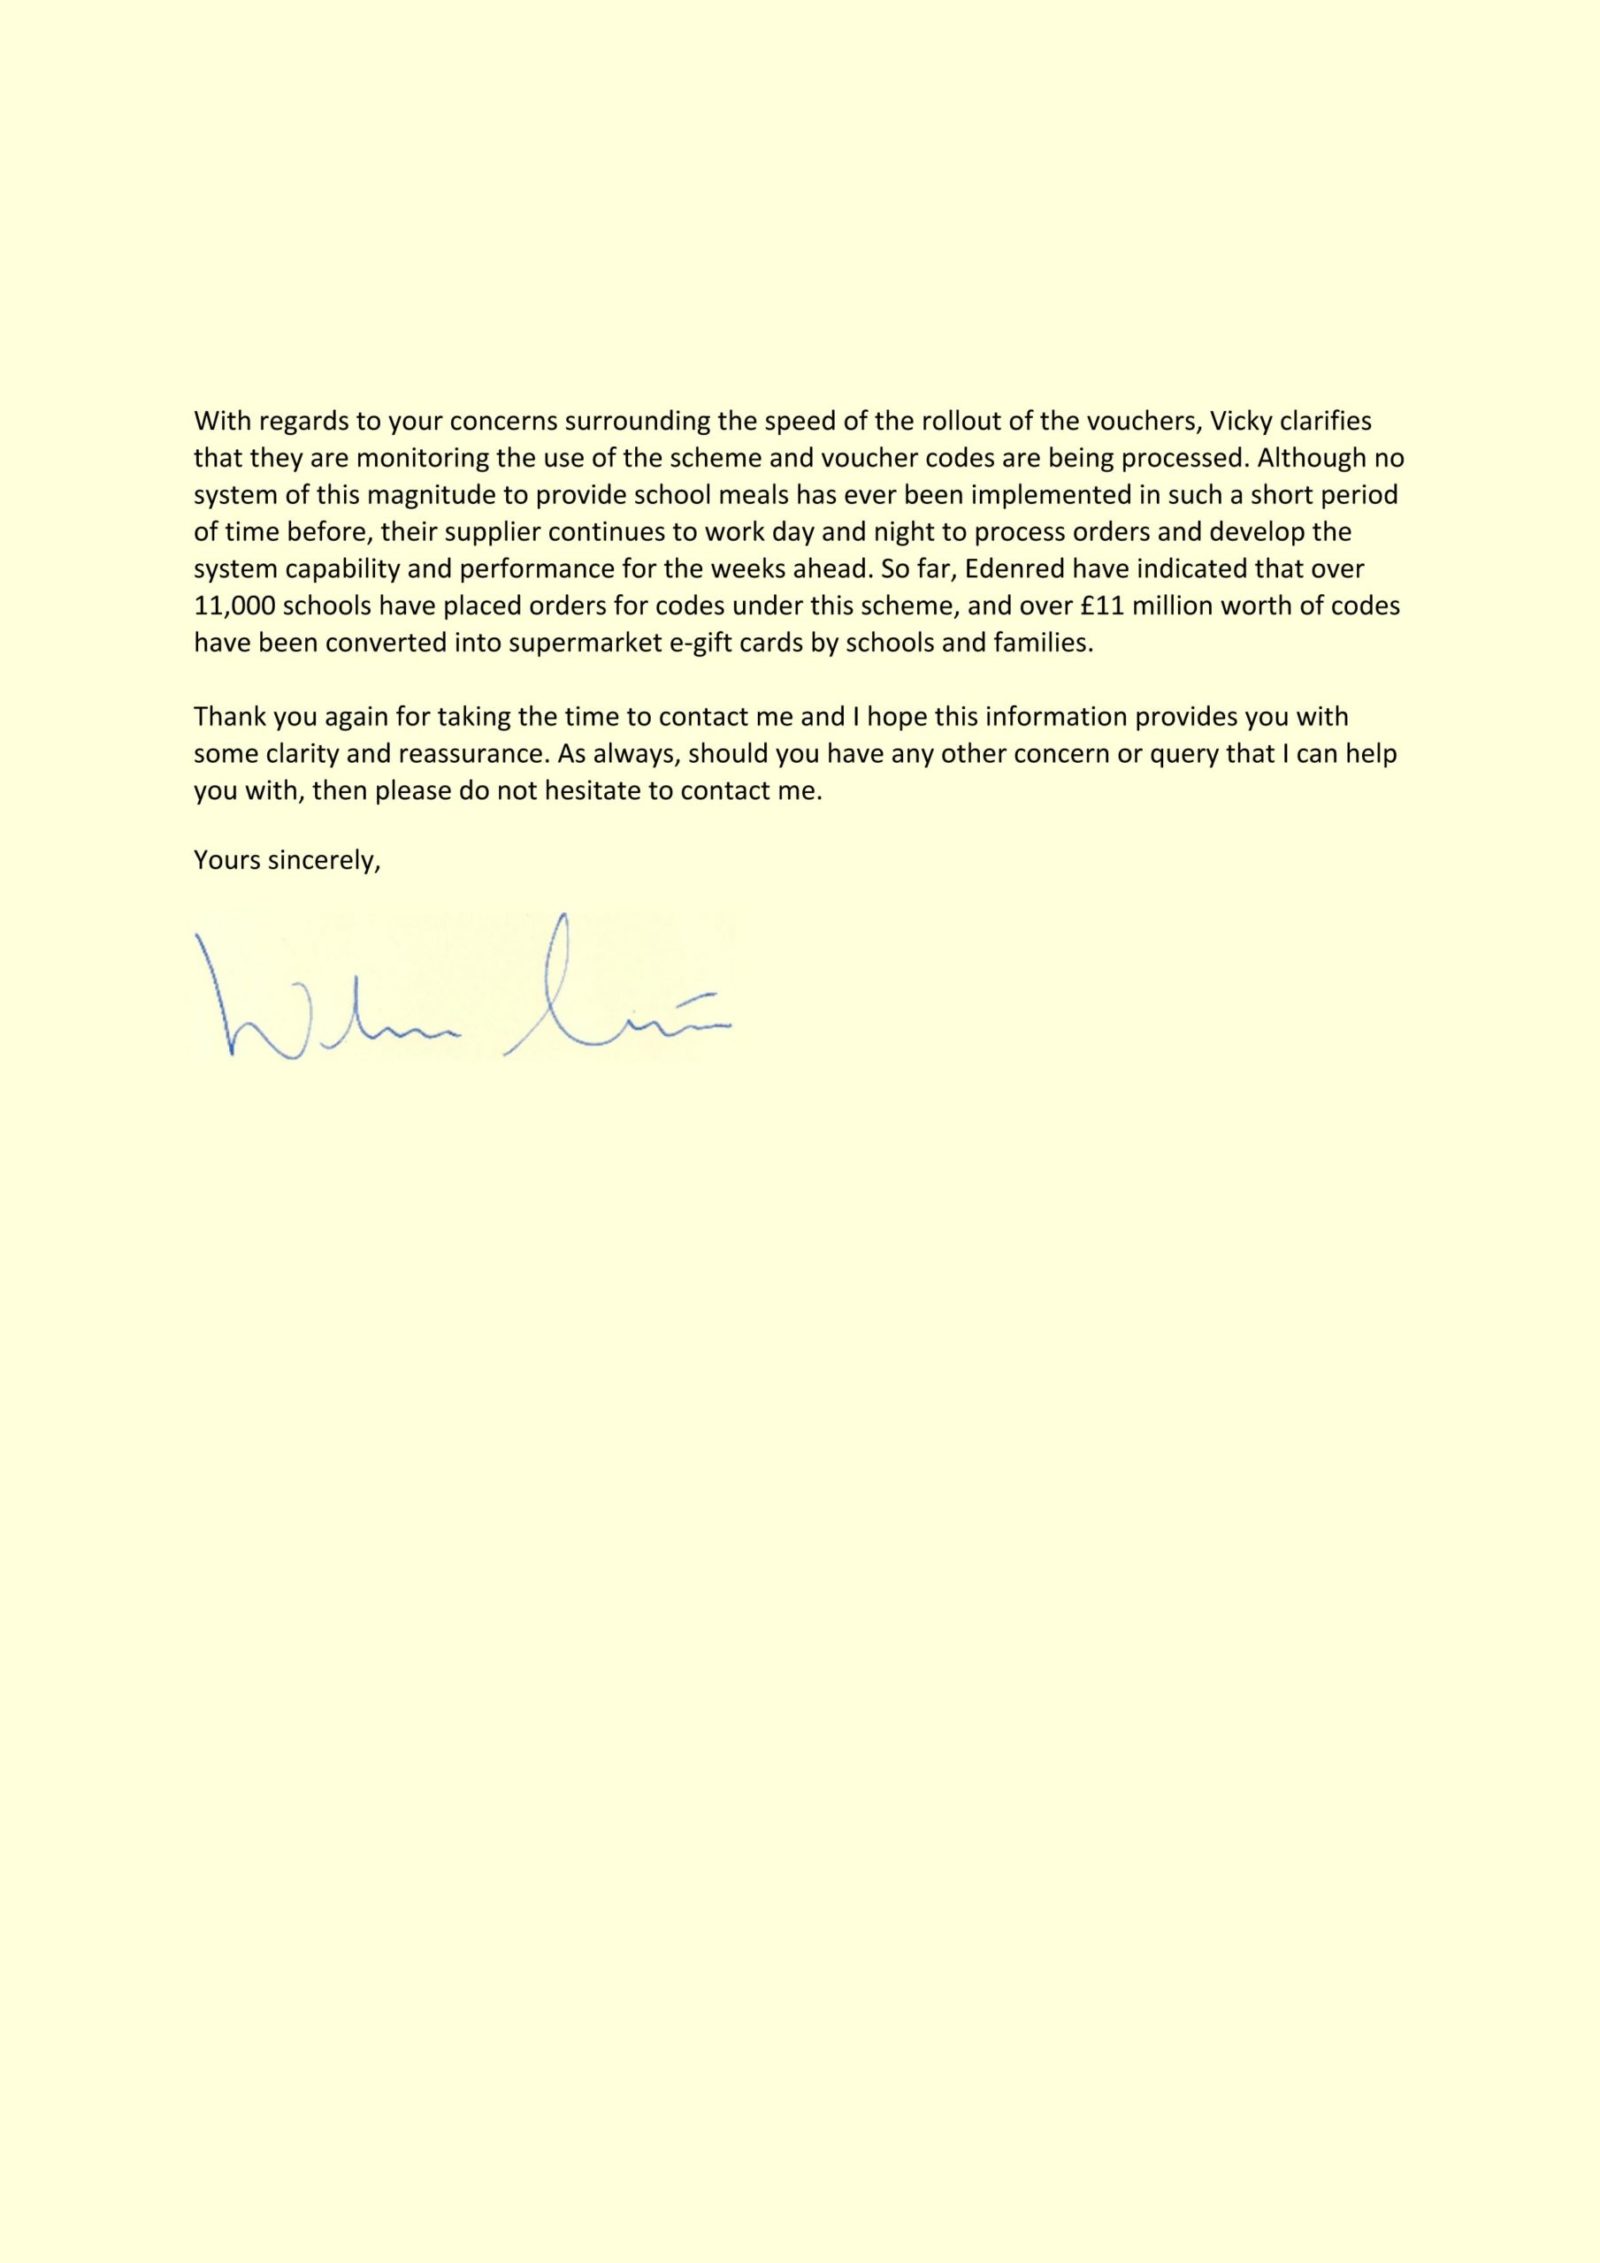 Will Quince MP Further Response Part 2